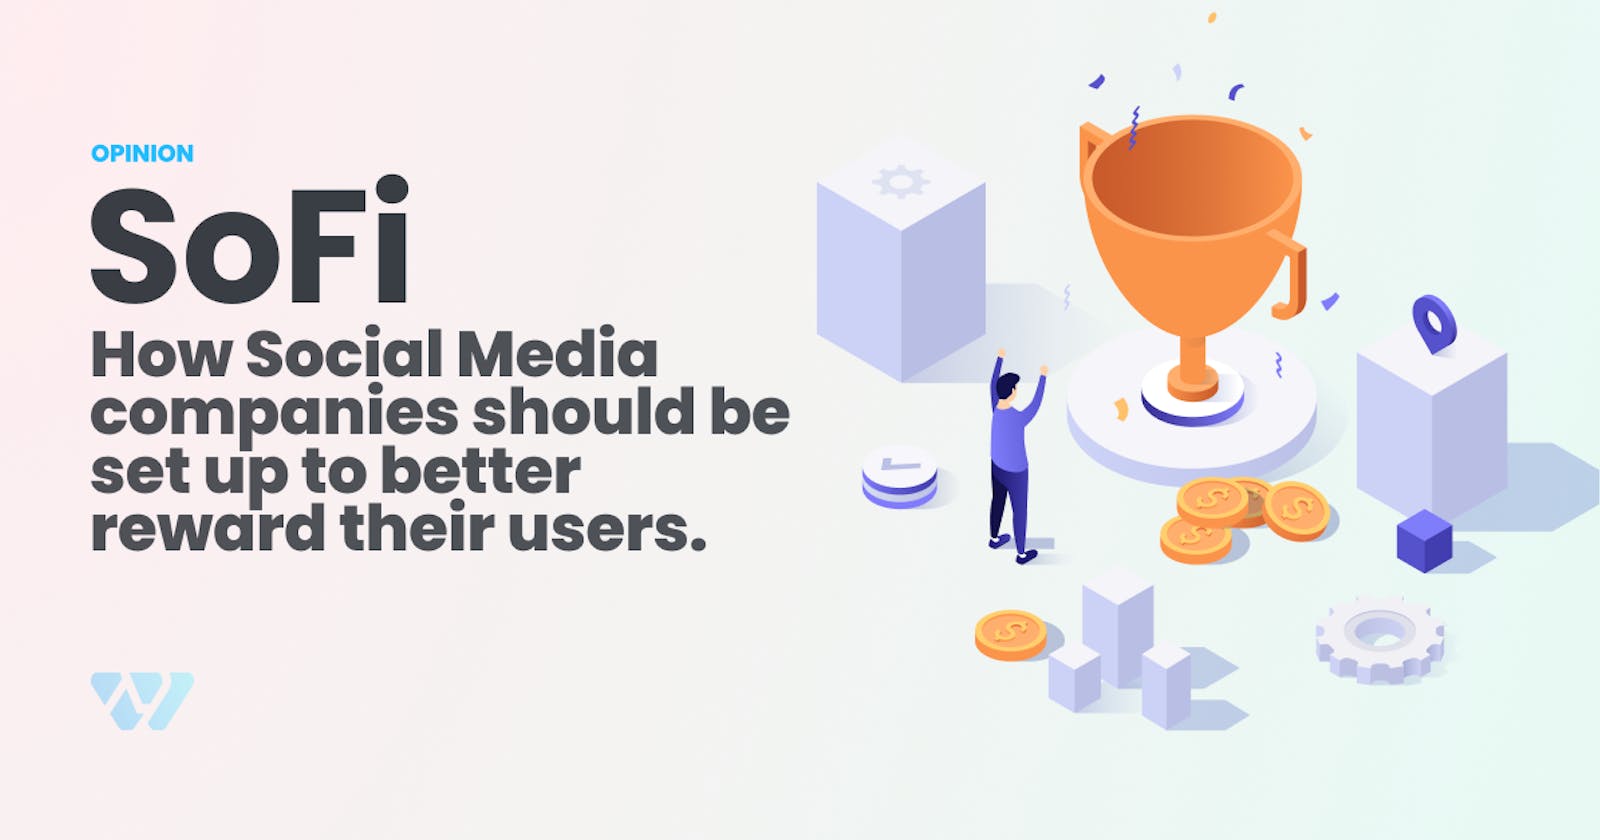 SoFi - How Social Media companies should be set up to better reward their users